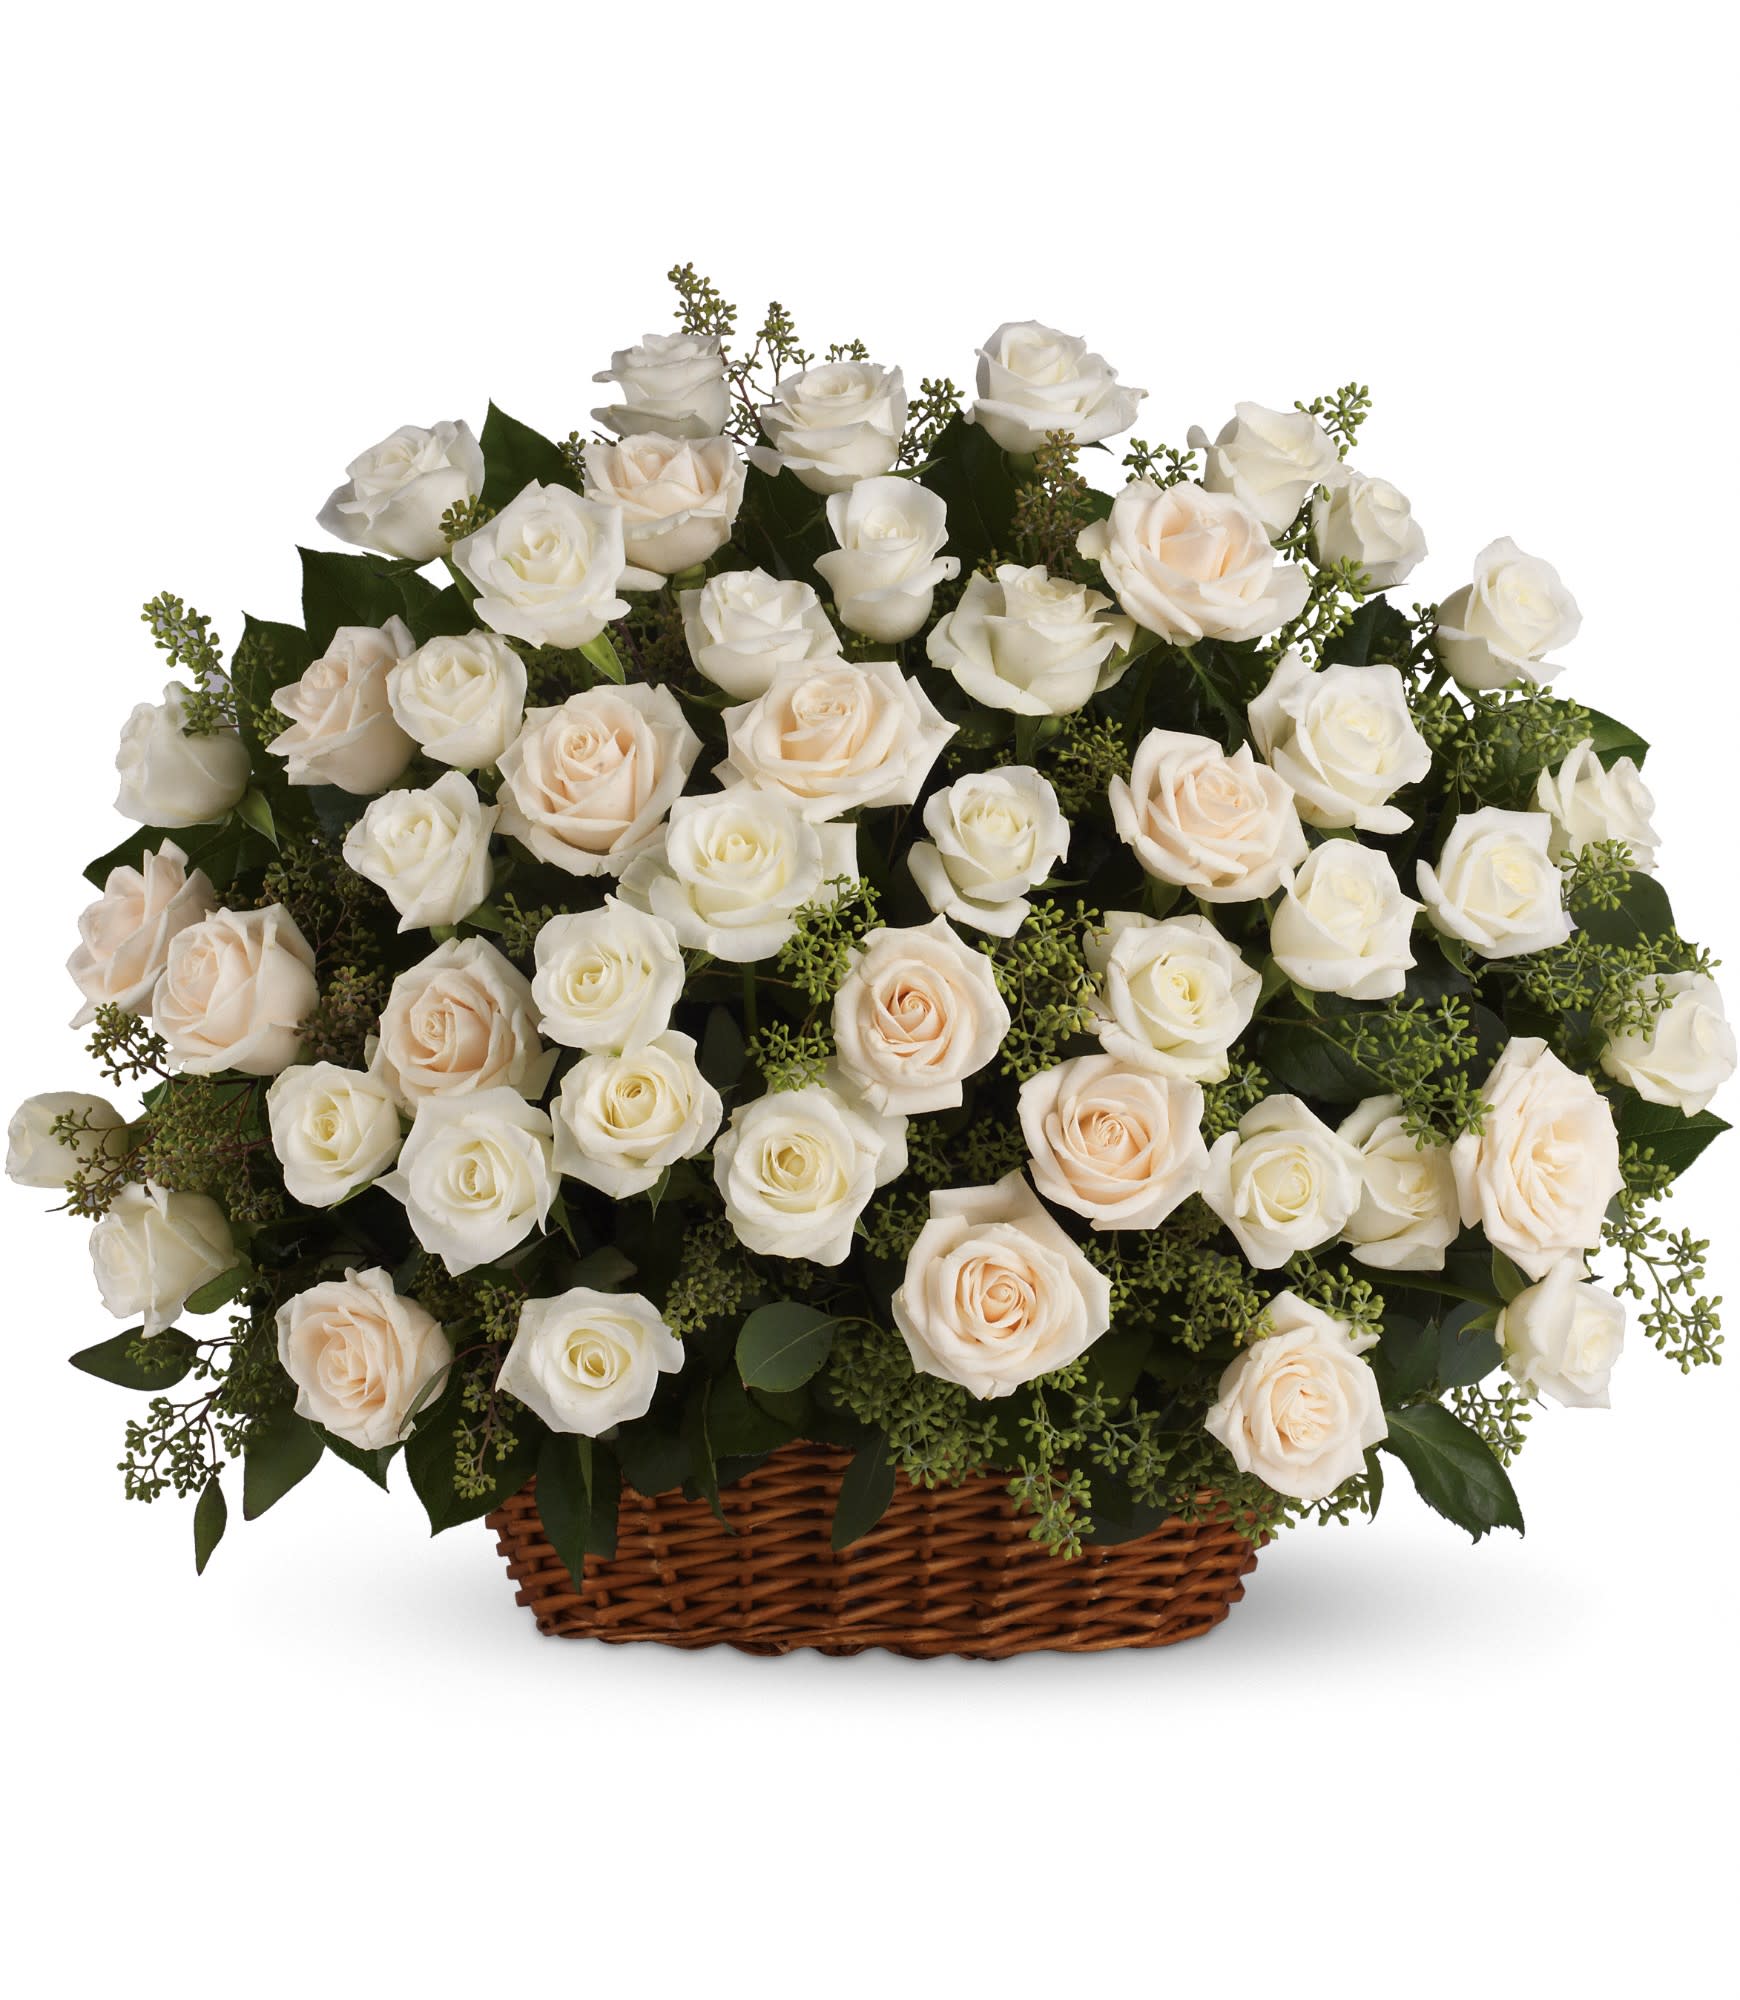 *5 DAYS NOTICE*Bountiful Rose Basket by Teleflora - A beautiful, bountiful basket of luminous white roses that feels so fresh, natural, and welcomed in a home or at a service. 